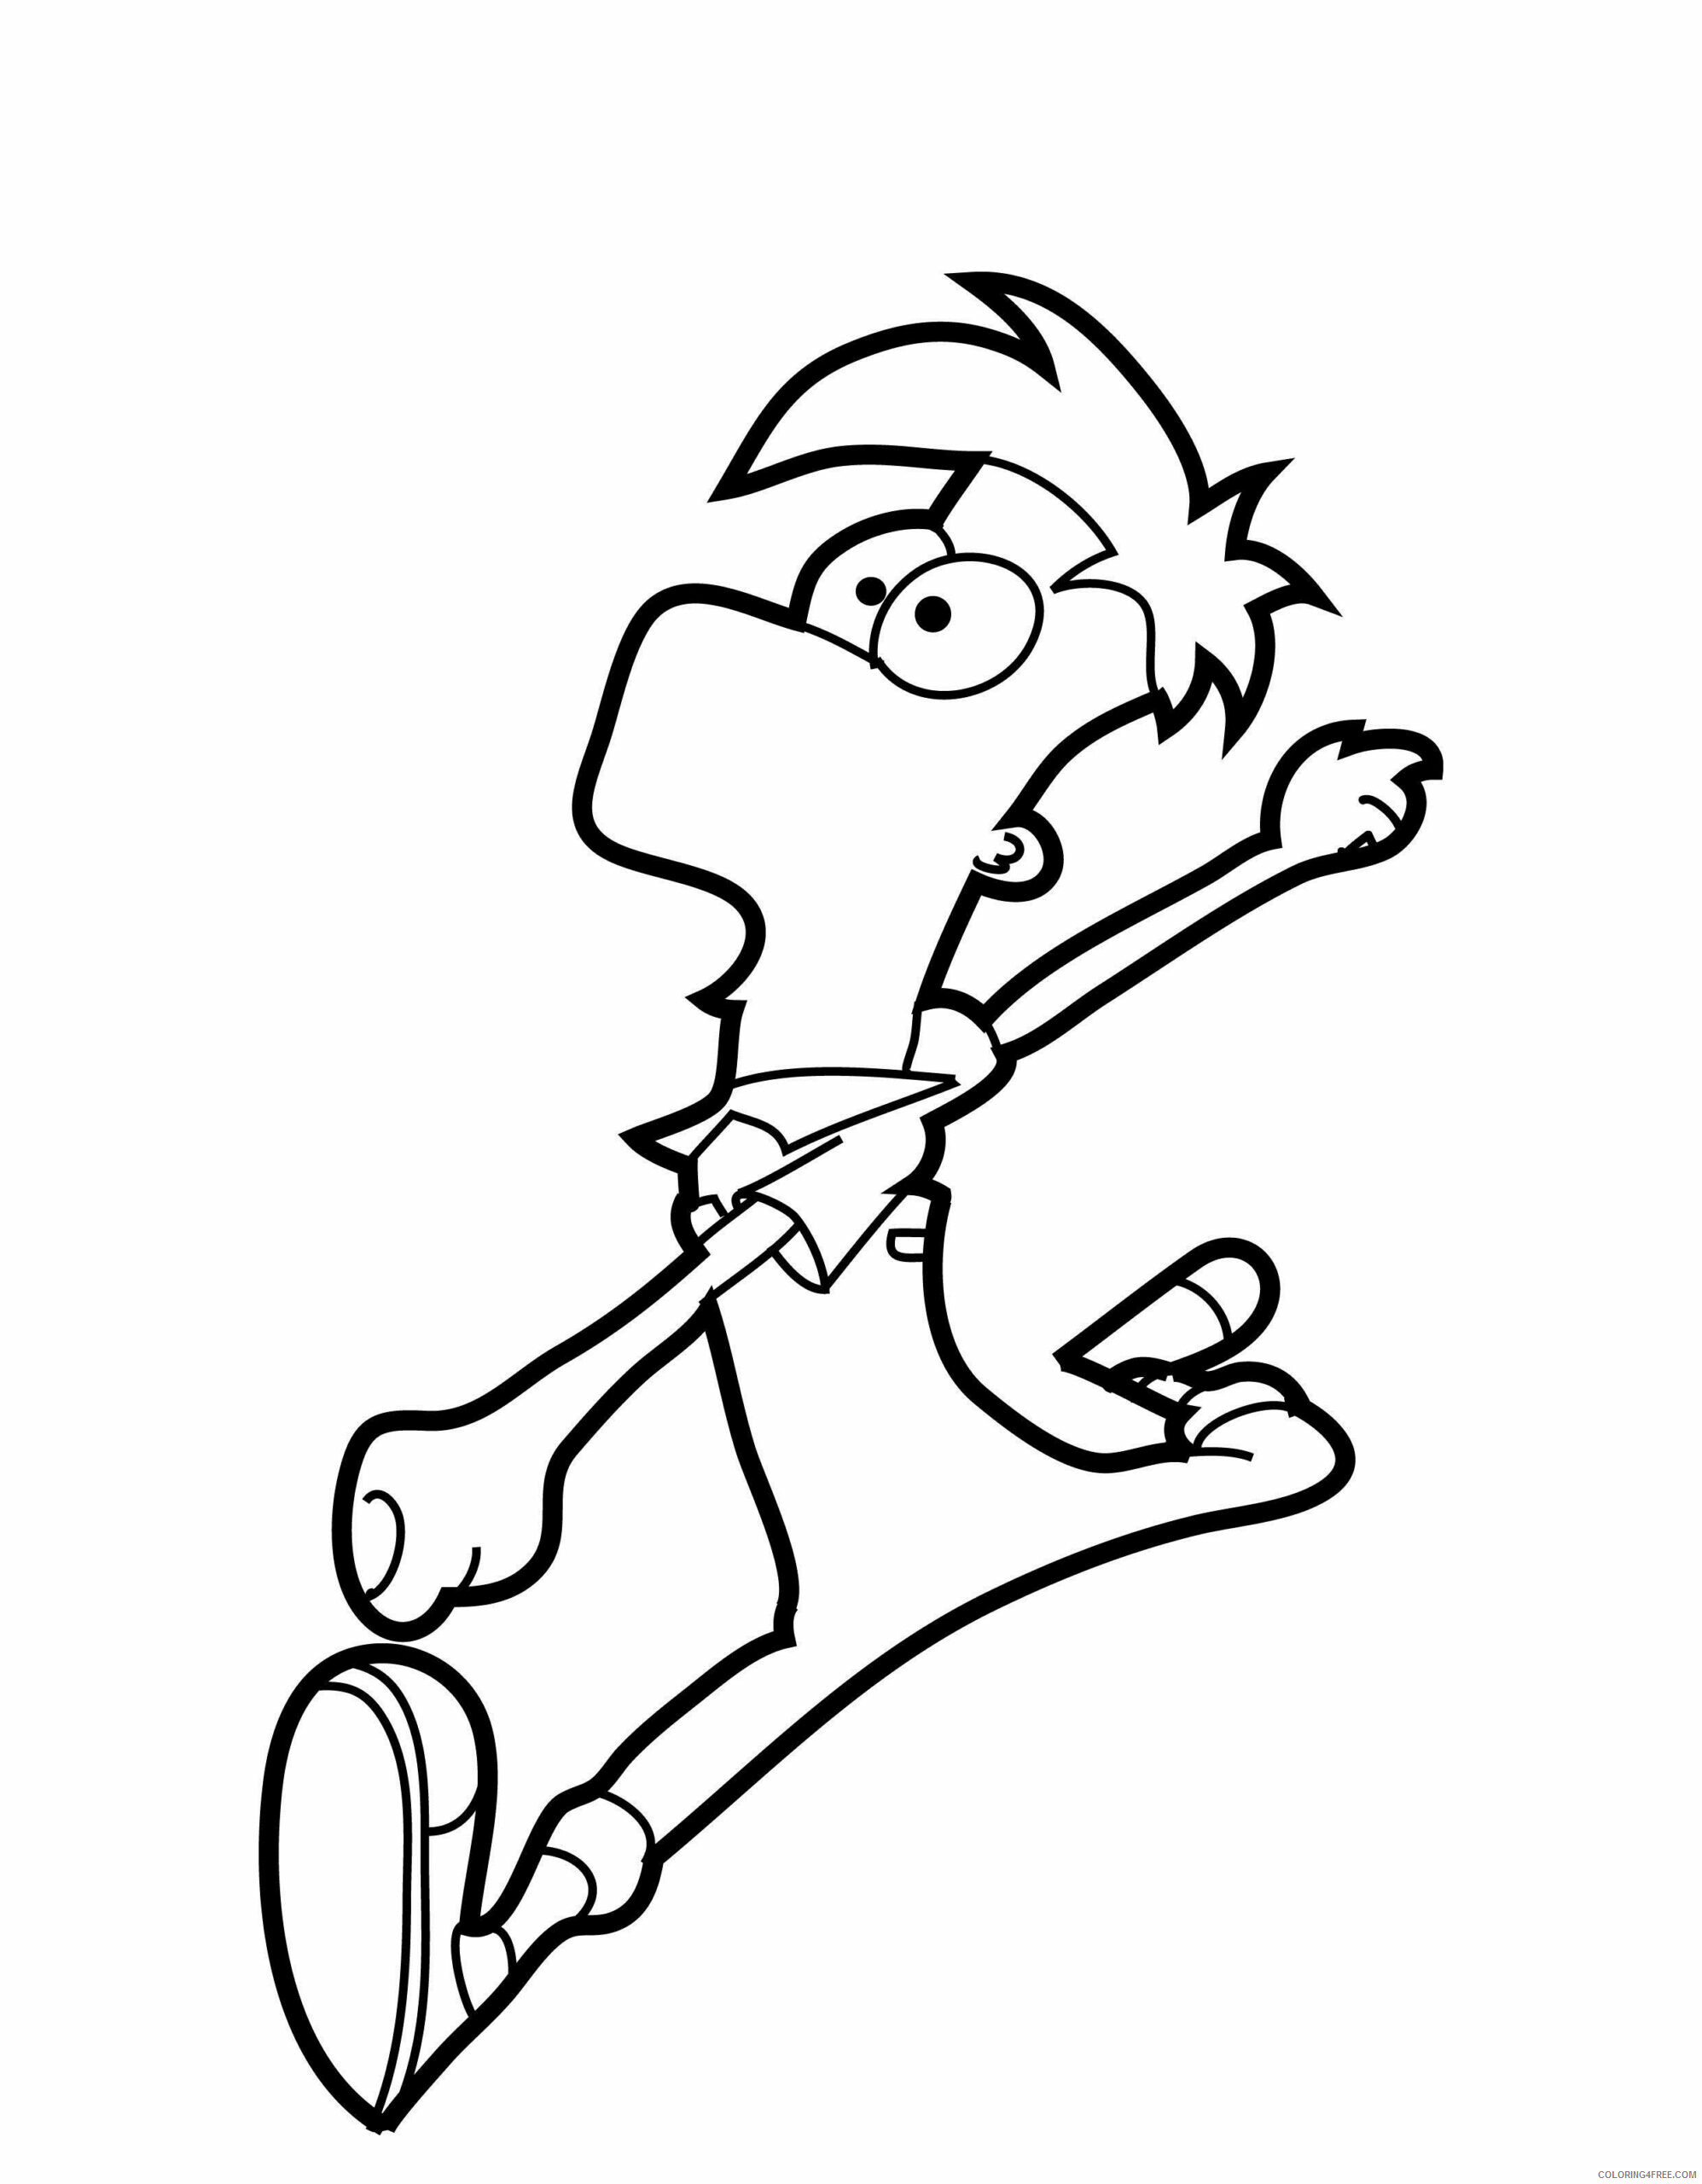 Phineas and Ferb Coloring Pages TV Film Printable 2020 06229 Coloring4free